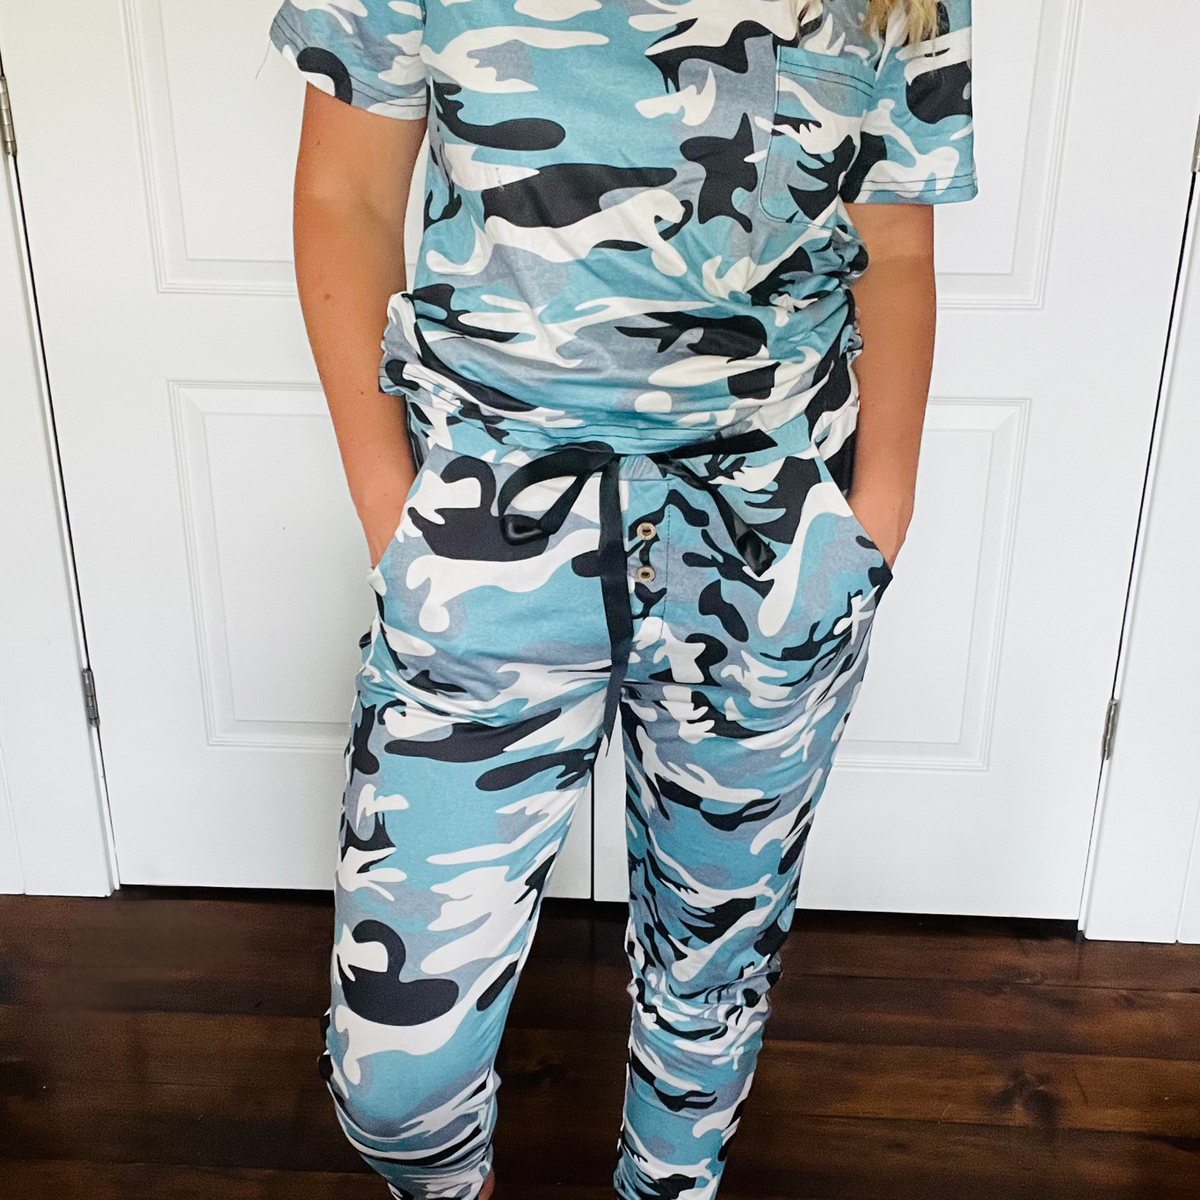 Anyone have the Incognito Camo leggings that can share review/pics? :  r/lululemon